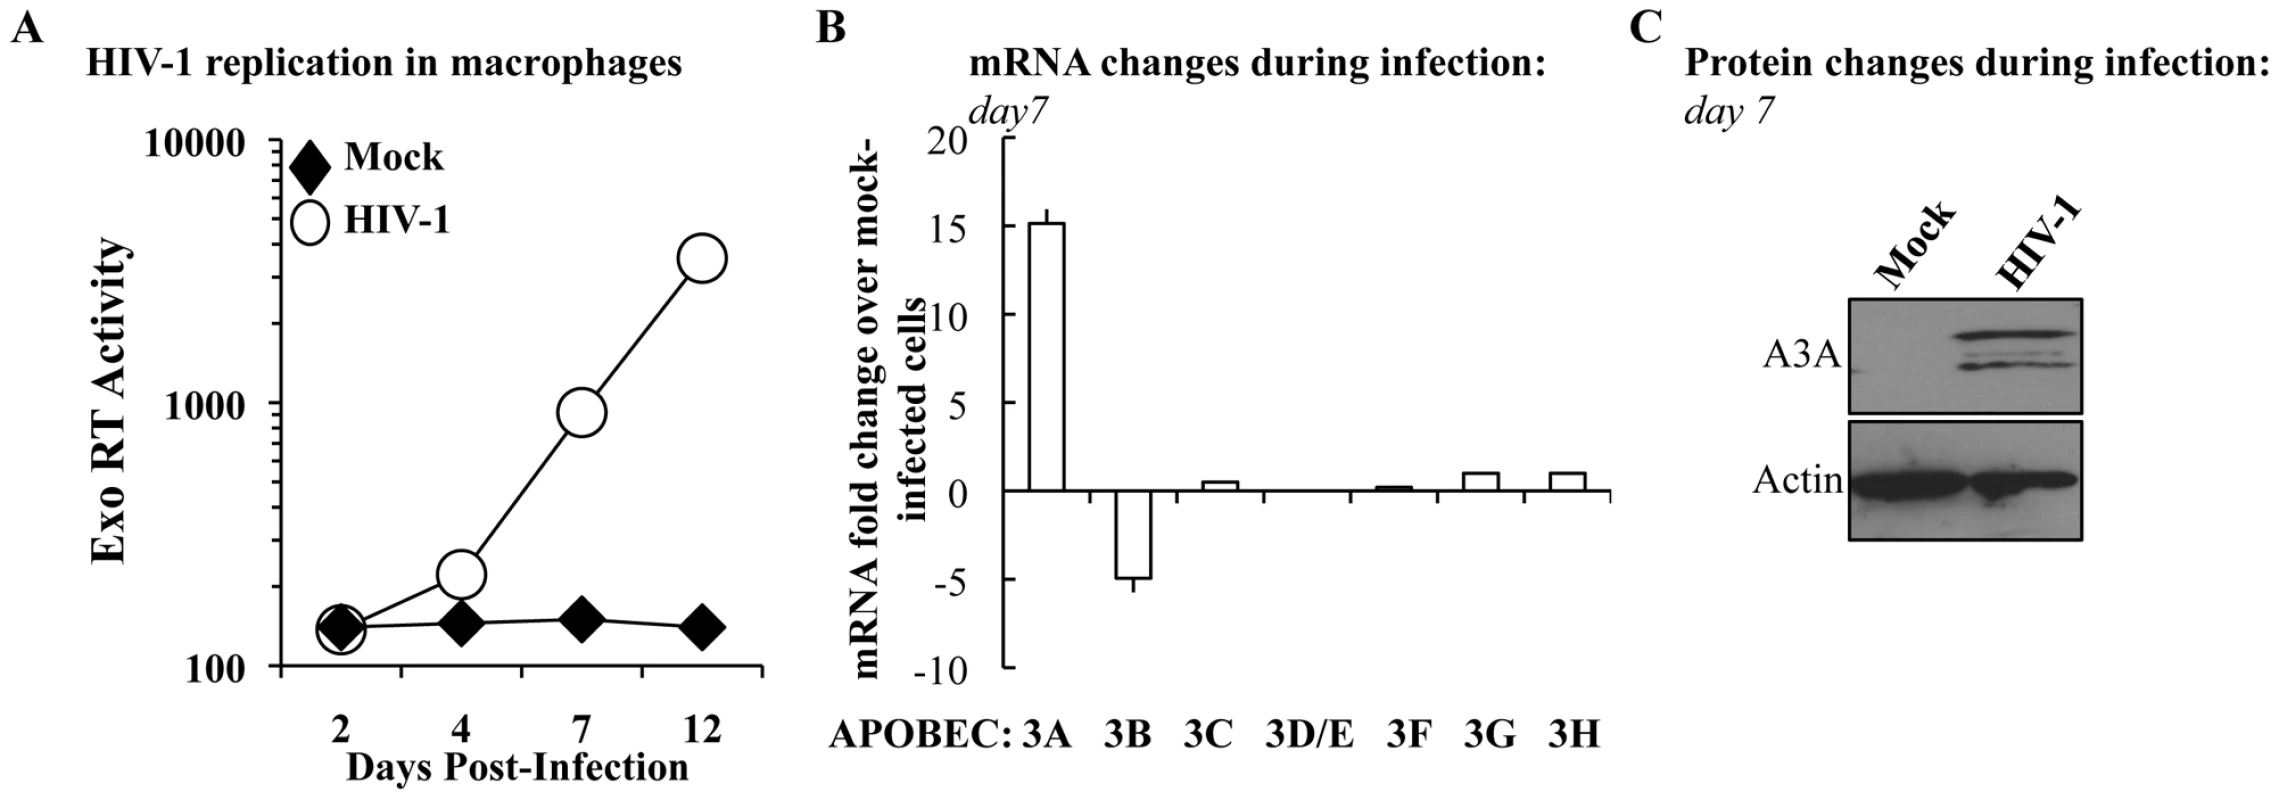 The expression of A3A is specifically increased during HIV-1 spread in infected macrophages.